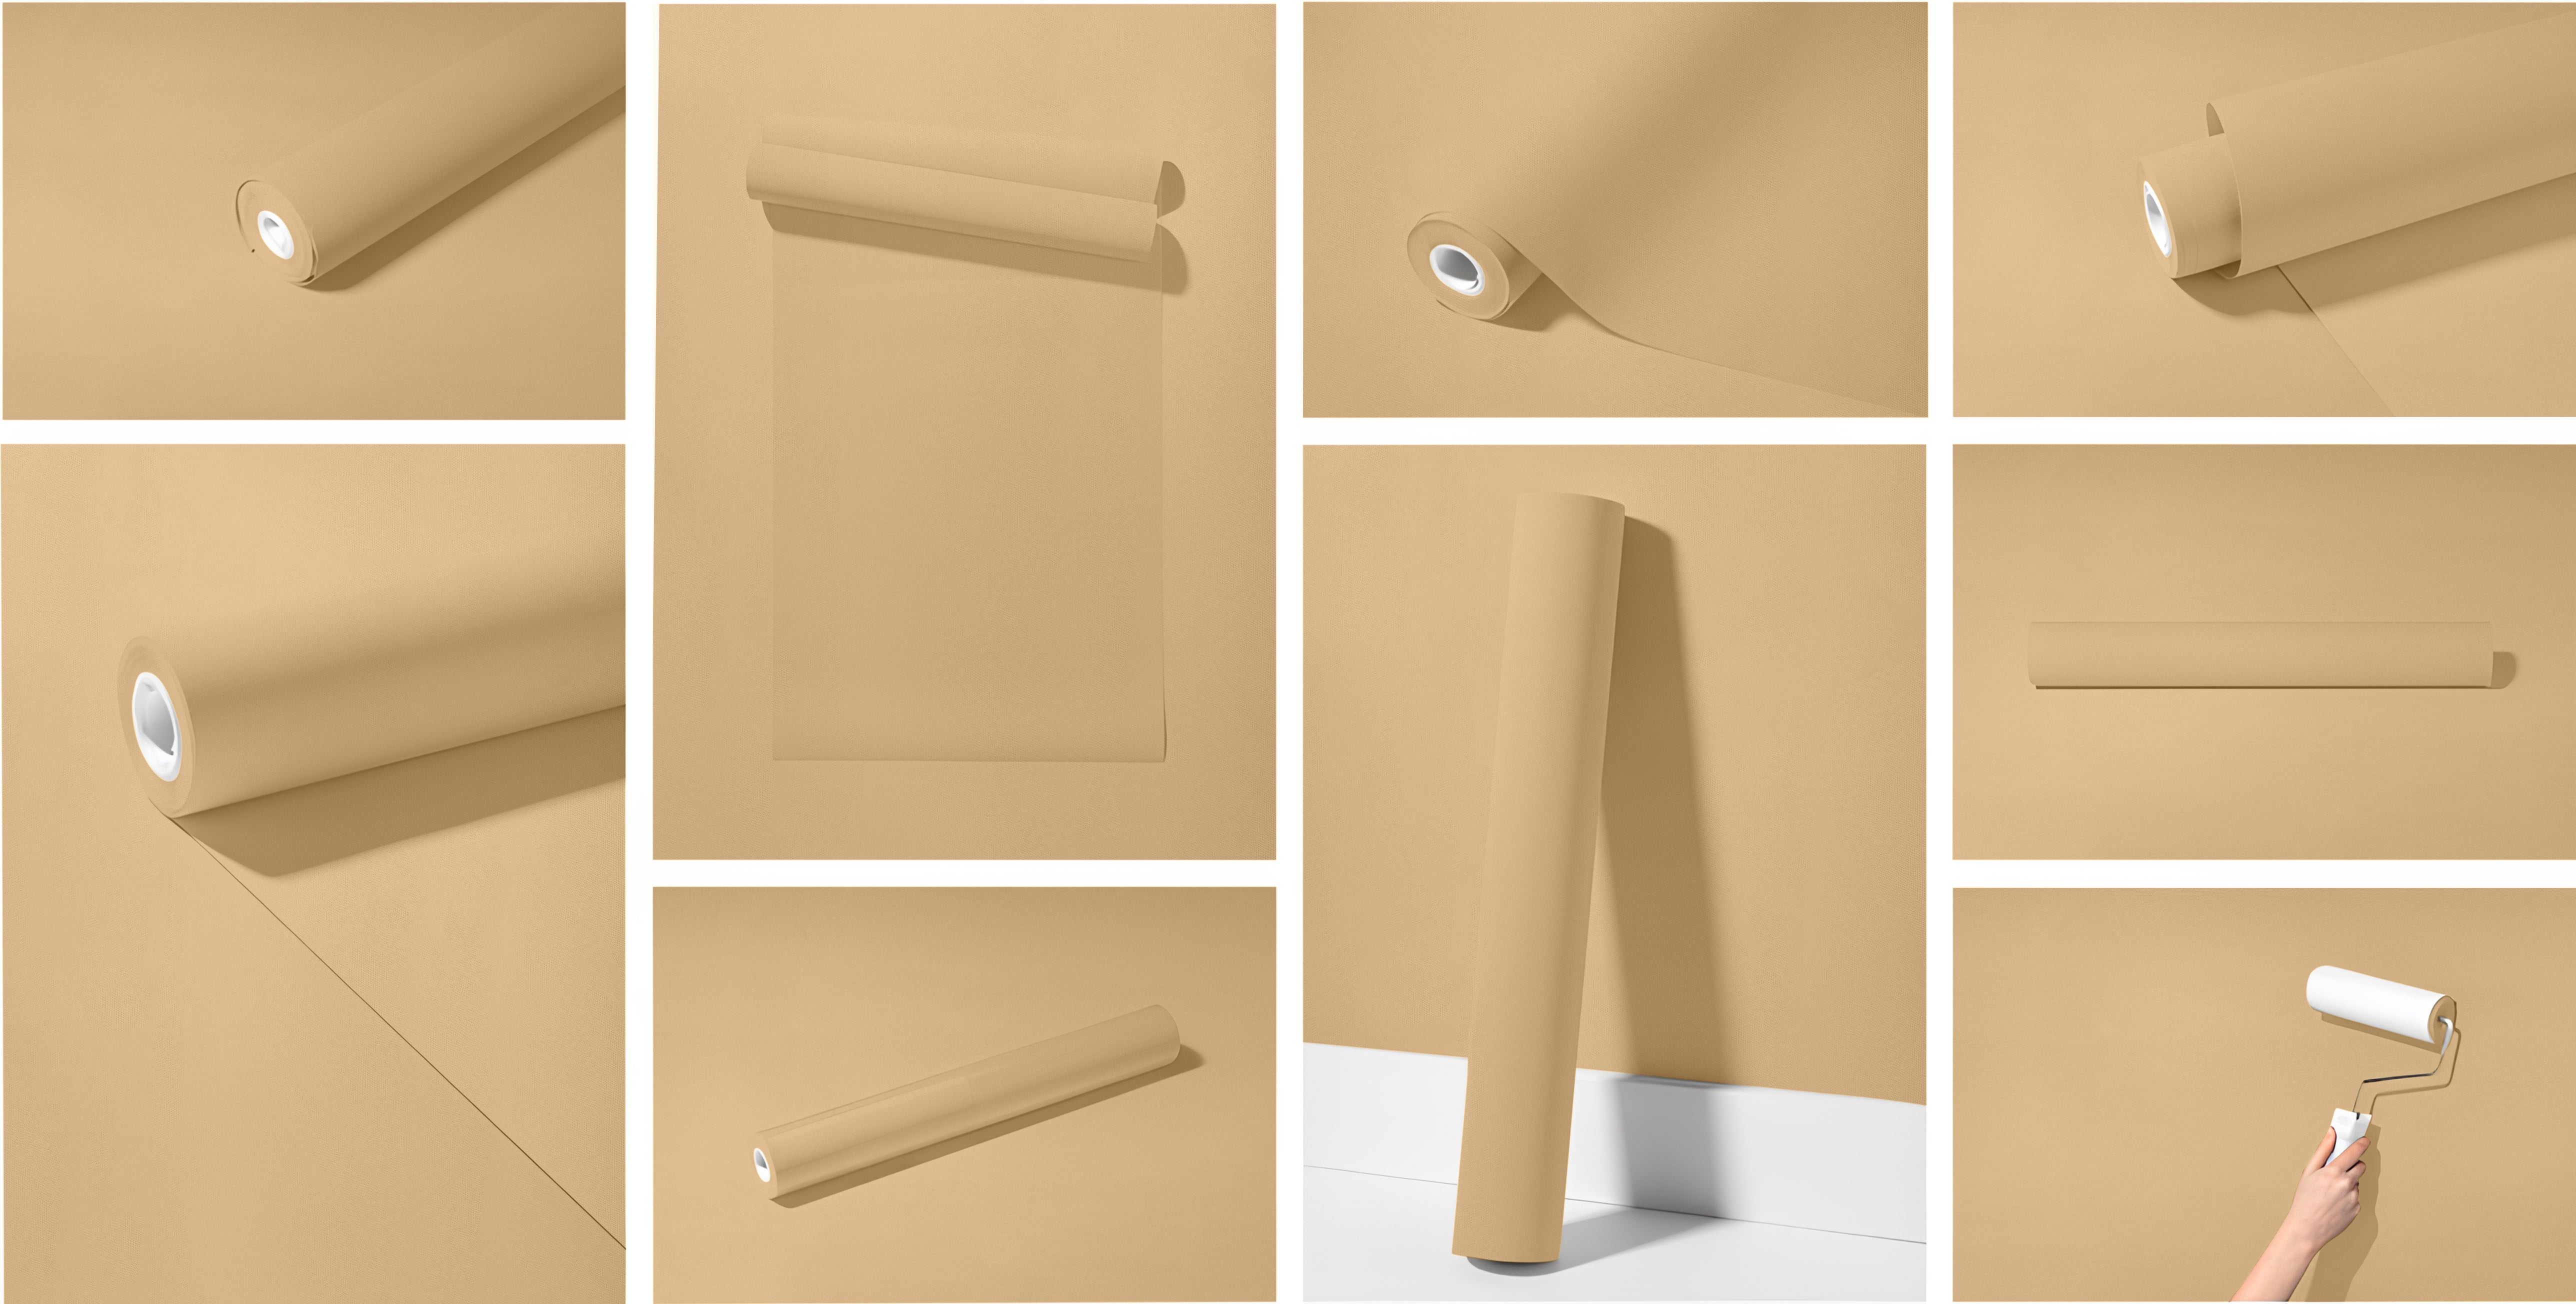 Peel & Stick Removable Re-usable Paint - Color RAL 1001 Beige - offRAL™ - RALRAW LLC, USA